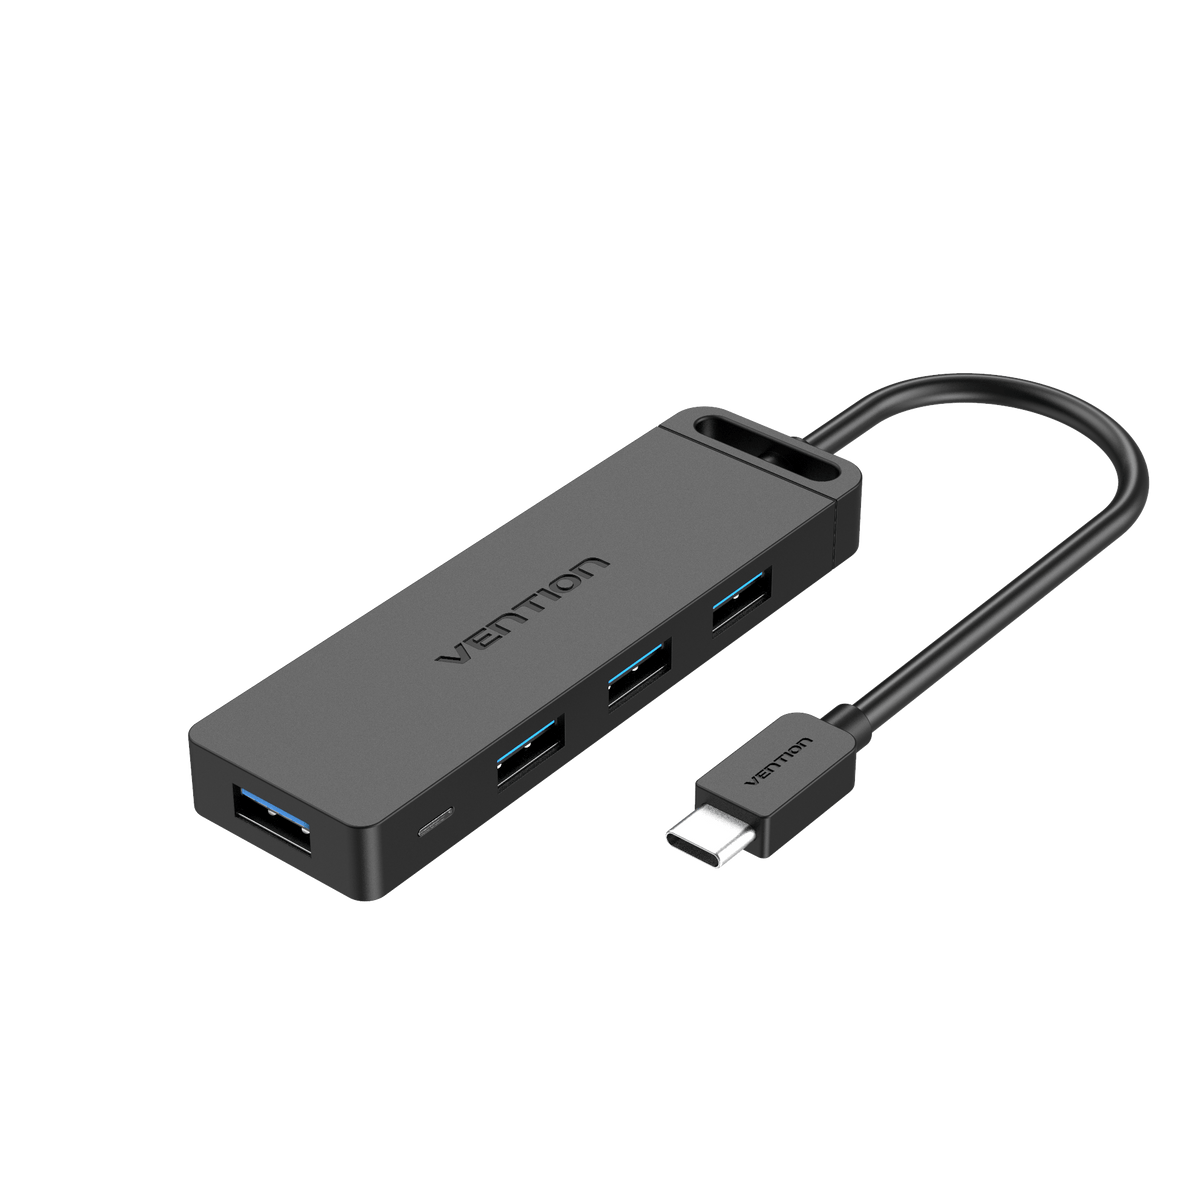 to 4-Port USB 3.0 Hub with Power Supply